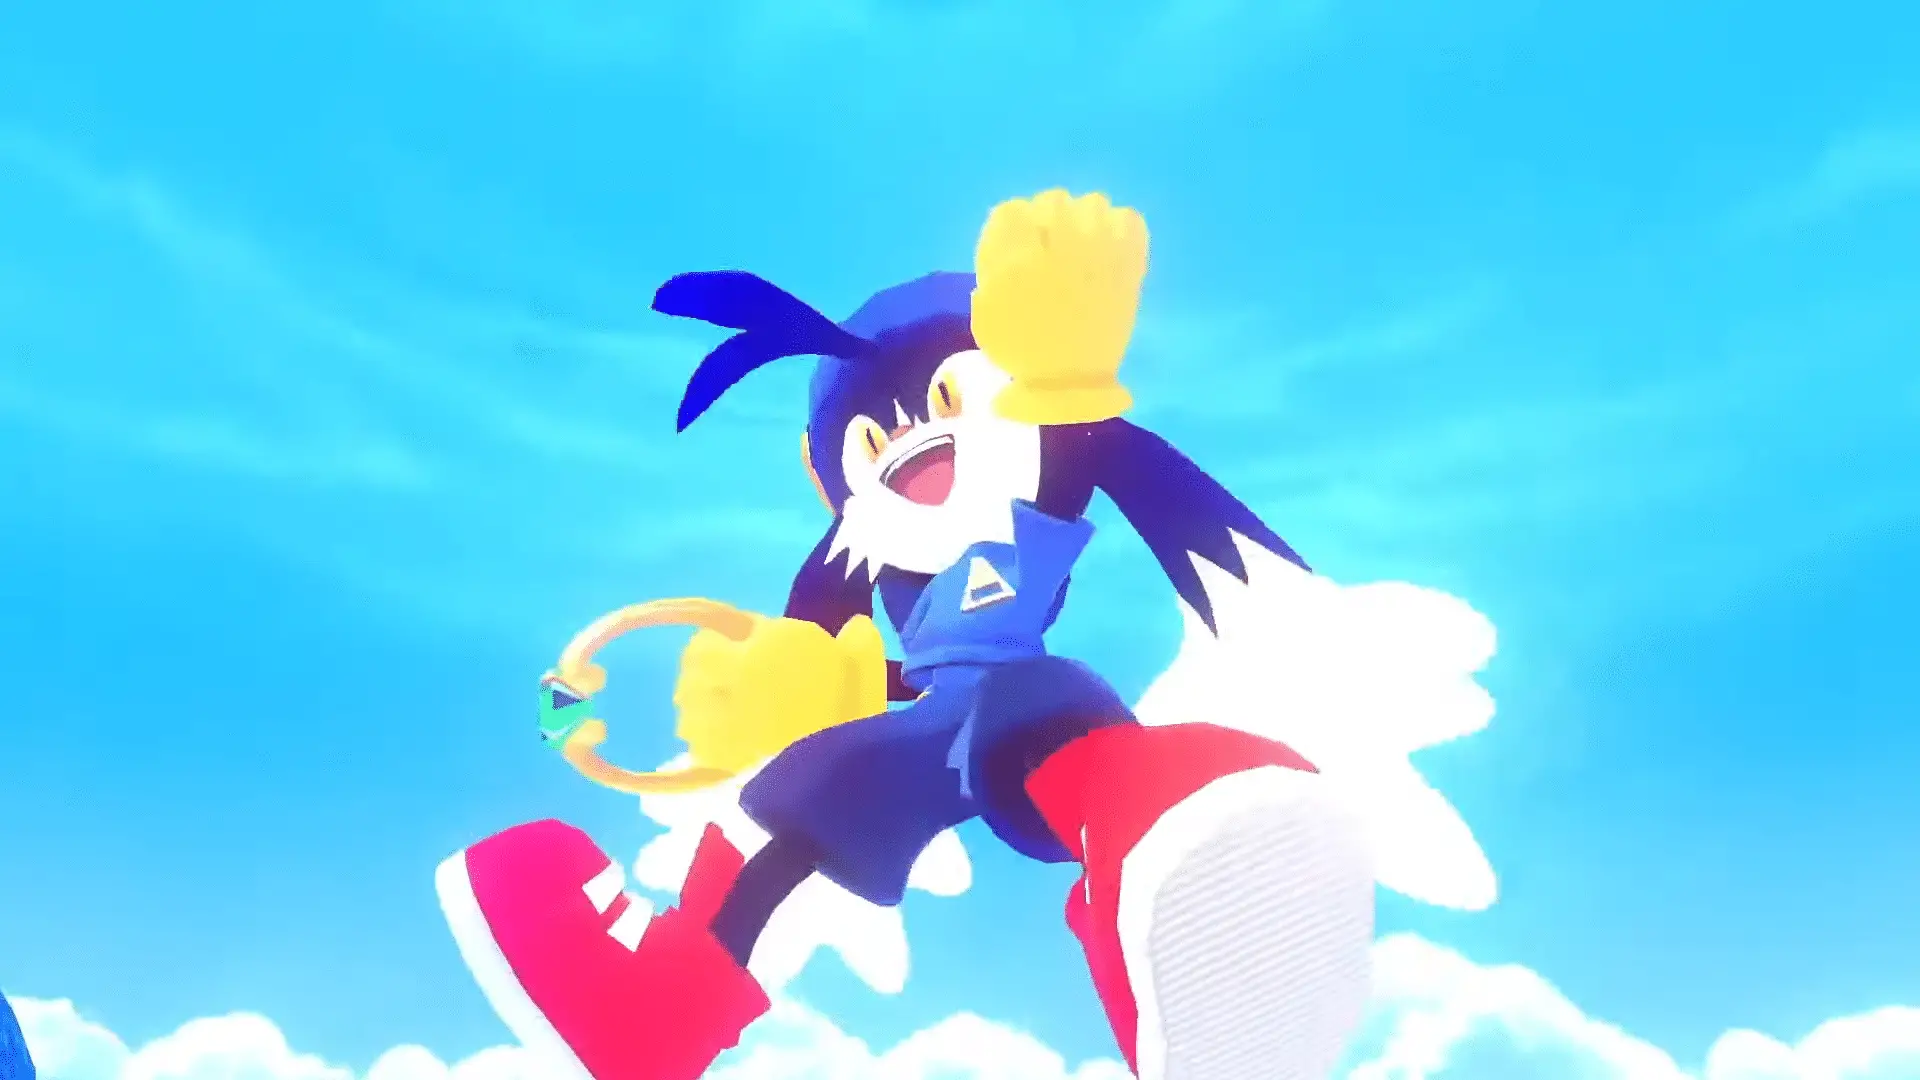 Klonoa Phantasy Reverie Series Announced For Switch, July Release; First 2 Games